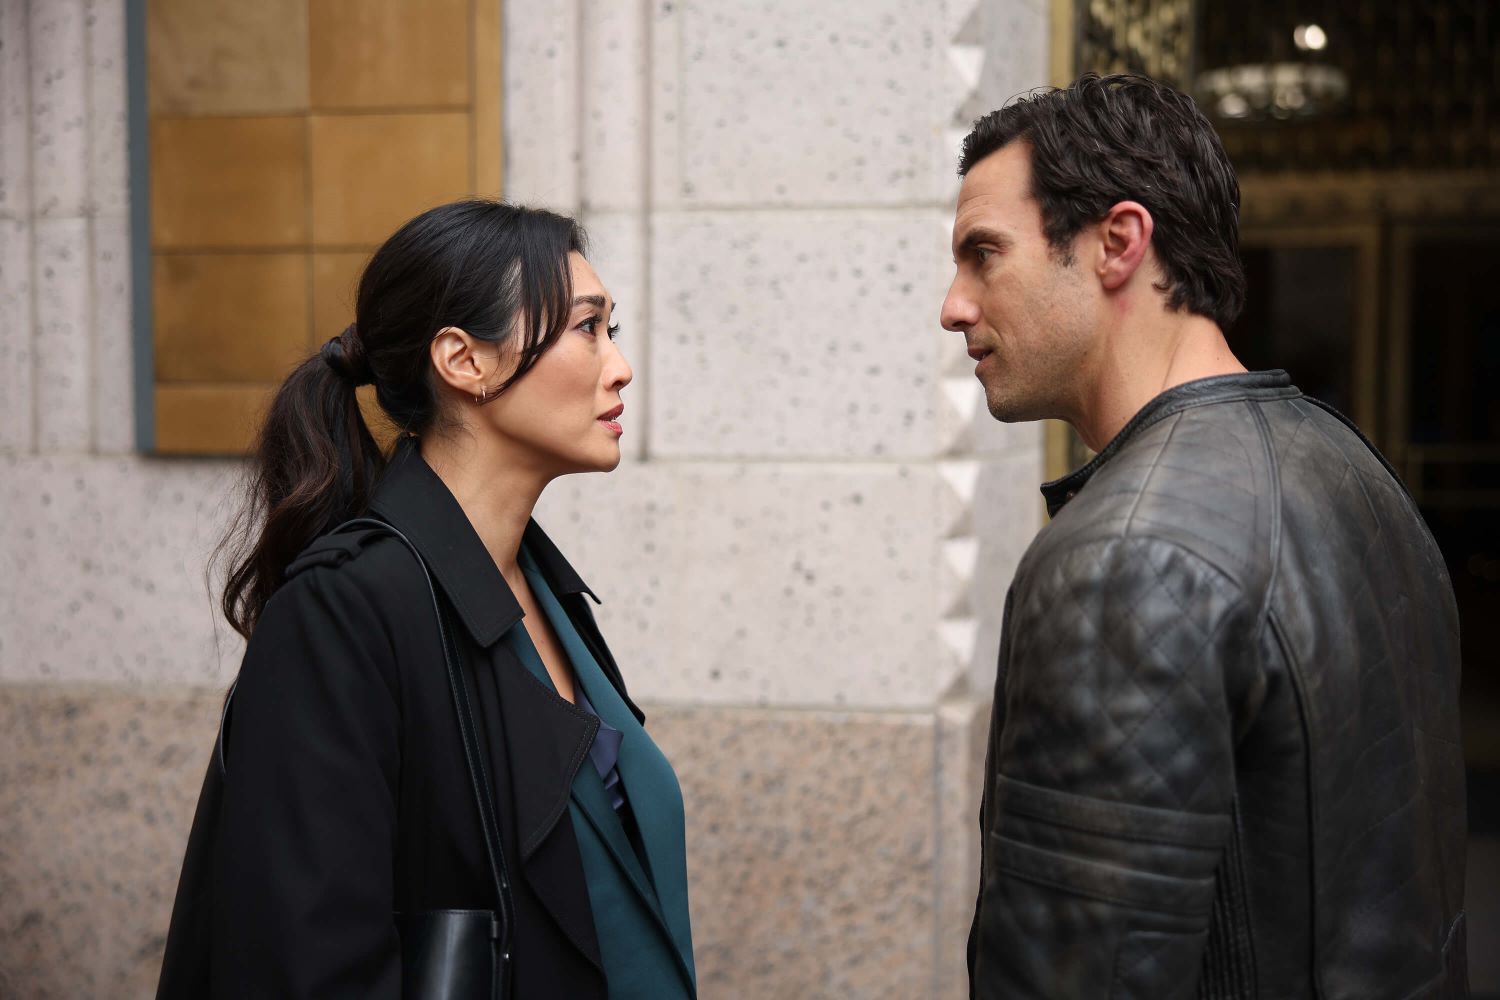 Catherine Haena Kim and Milo Ventimiglia, in character as Emma and Charlie in 'The Company You Keep,' share a scene in the show. Emma wears a black coat over a teal suit. Charlie wears a black leather jacket.